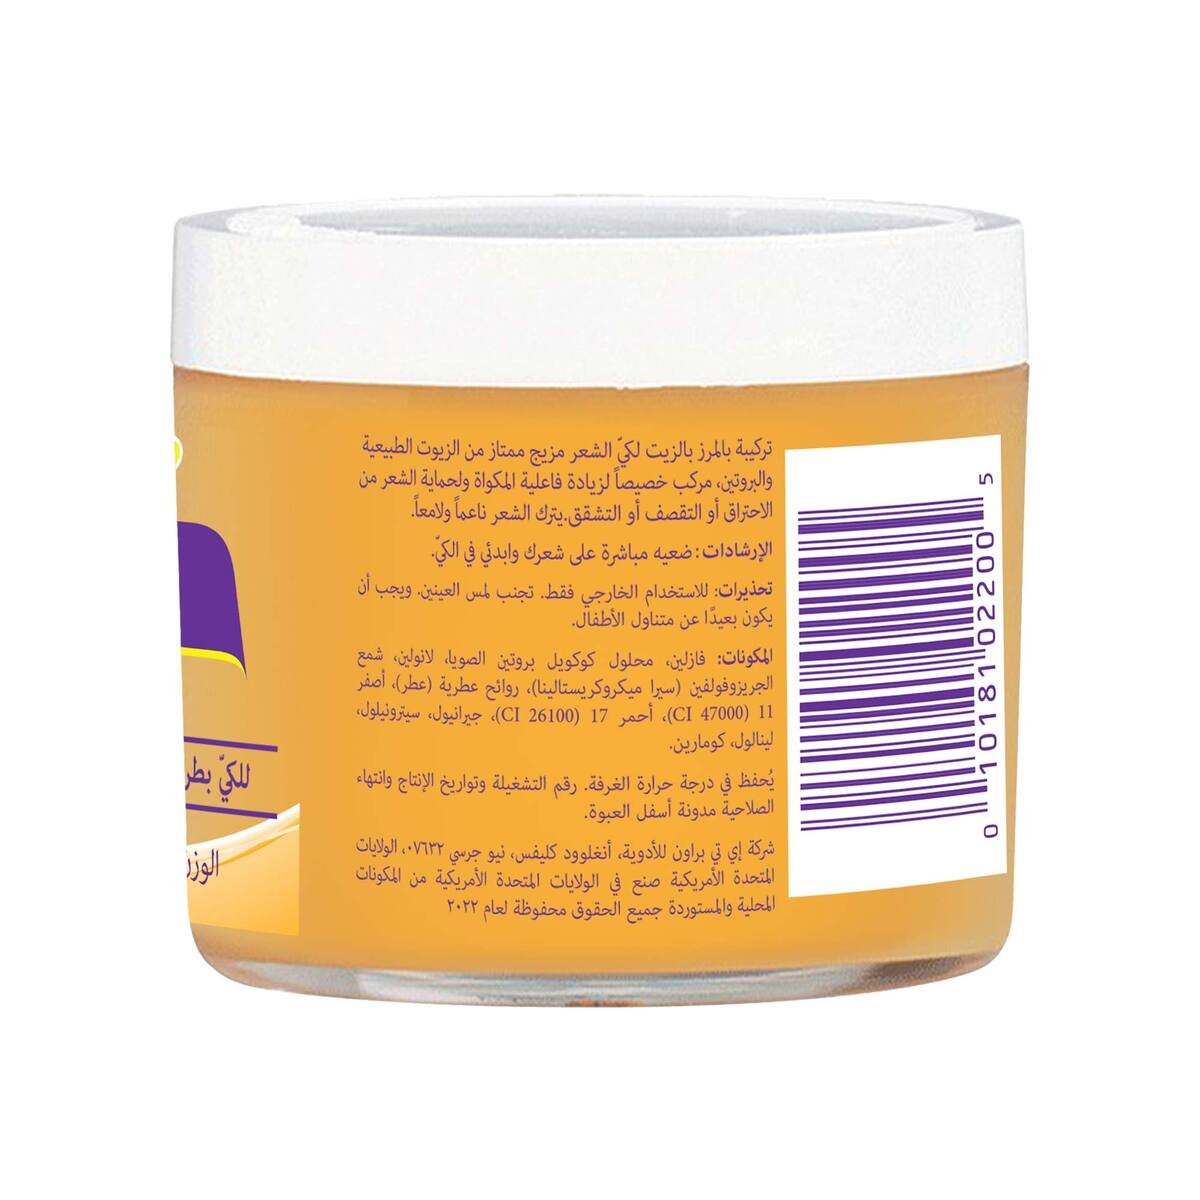 Palmer's Pressing Oil Formula Hair Cream With Protein 150 g